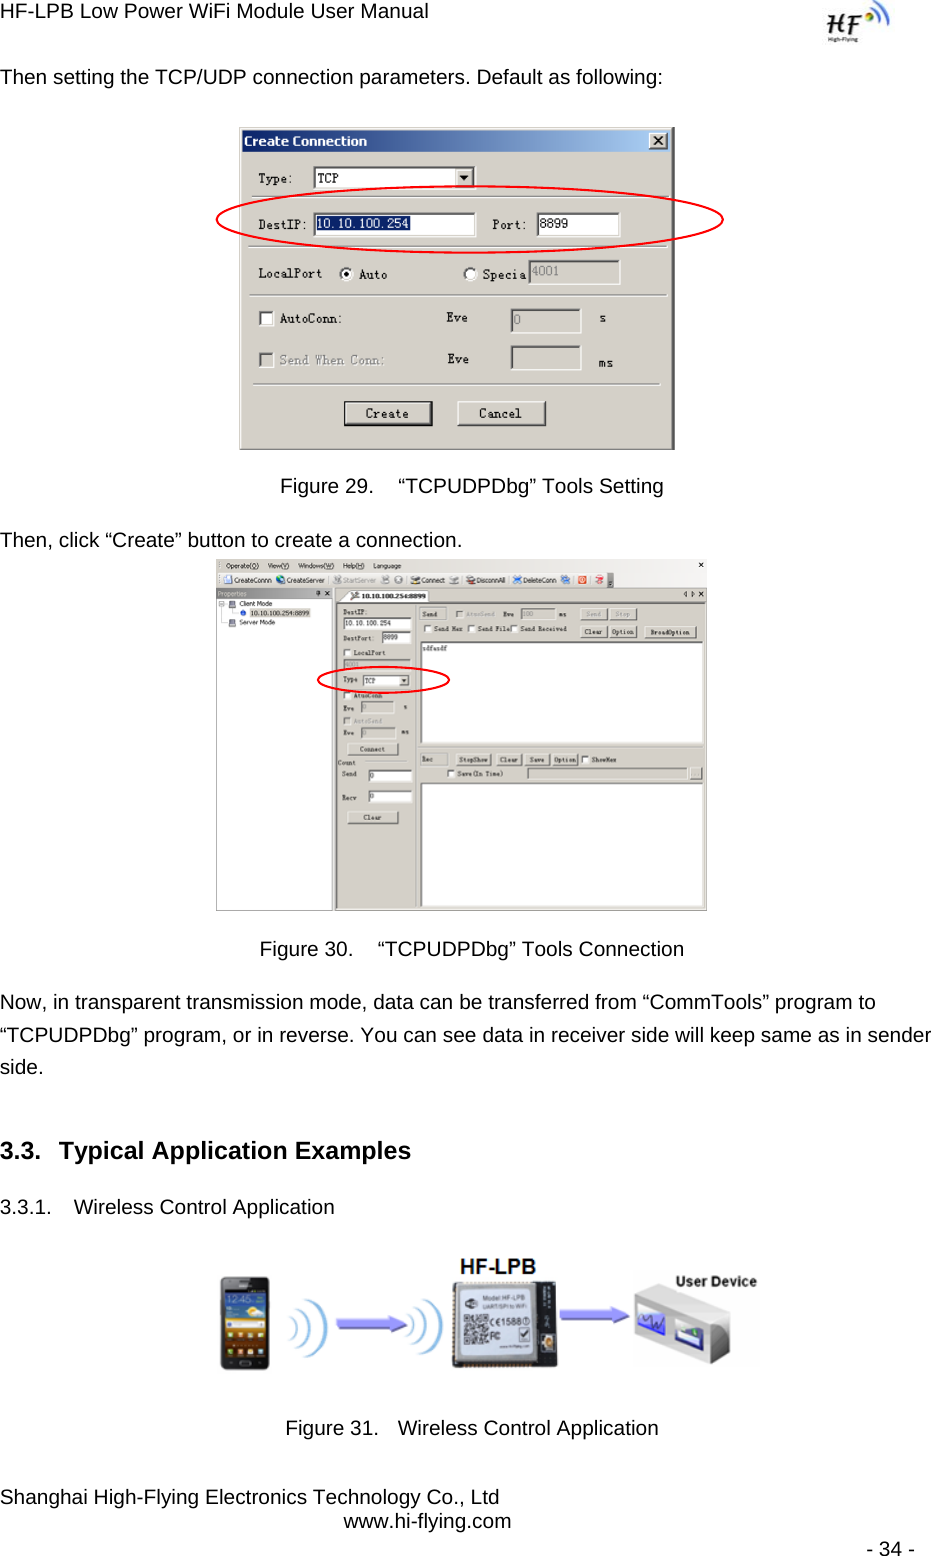 HF-LPB Low Power WiFi Module User Manual Shanghai High-Flying Electronics Technology Co., Ltd www.hi-flying.com   - 34 - Then setting the TCP/UDP connection parameters. Default as following:   Figure 29.   “TCPUDPDbg” Tools Setting Then, click “Create” button to create a connection.                              Figure 30.   “TCPUDPDbg” Tools Connection Now, in transparent transmission mode, data can be transferred from “CommTools” program to “TCPUDPDbg” program, or in reverse. You can see data in receiver side will keep same as in sender side. 3.3.  Typical Application Examples 3.3.1.  Wireless Control Application     Figure 31.  Wireless Control Application 